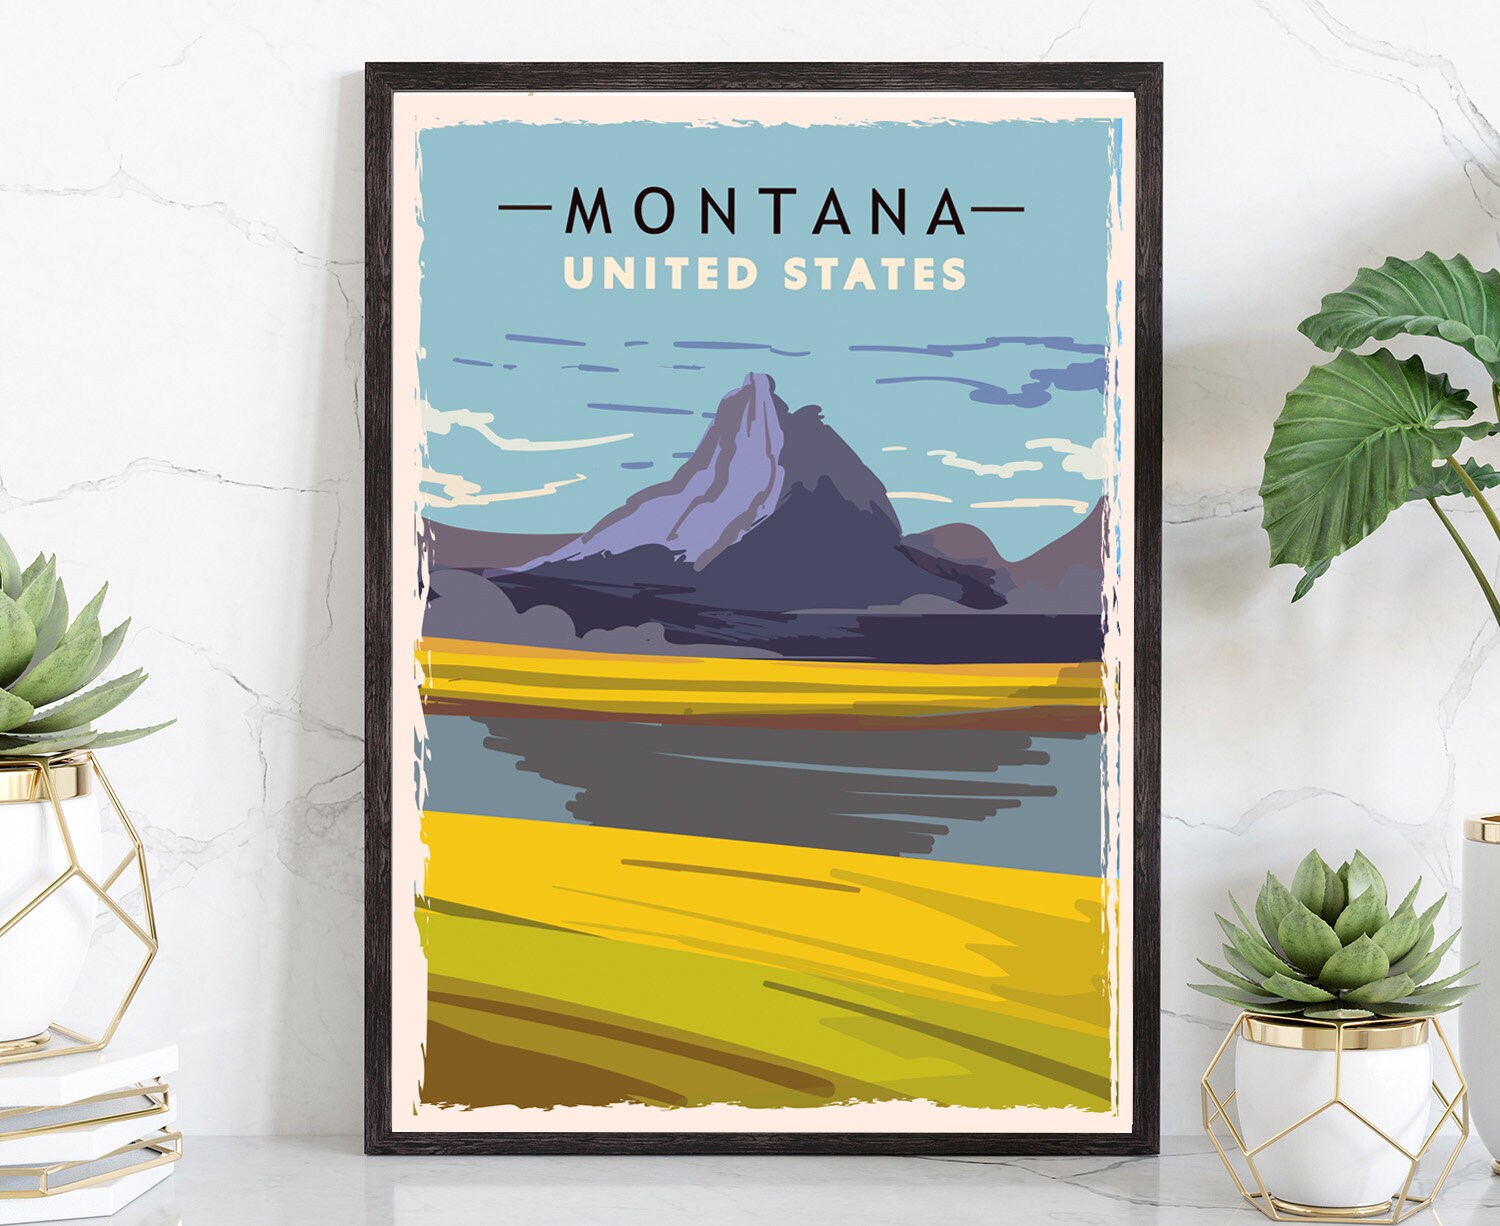 Montana Vintage Rustic Poster Print, Retro Style Travel Poster